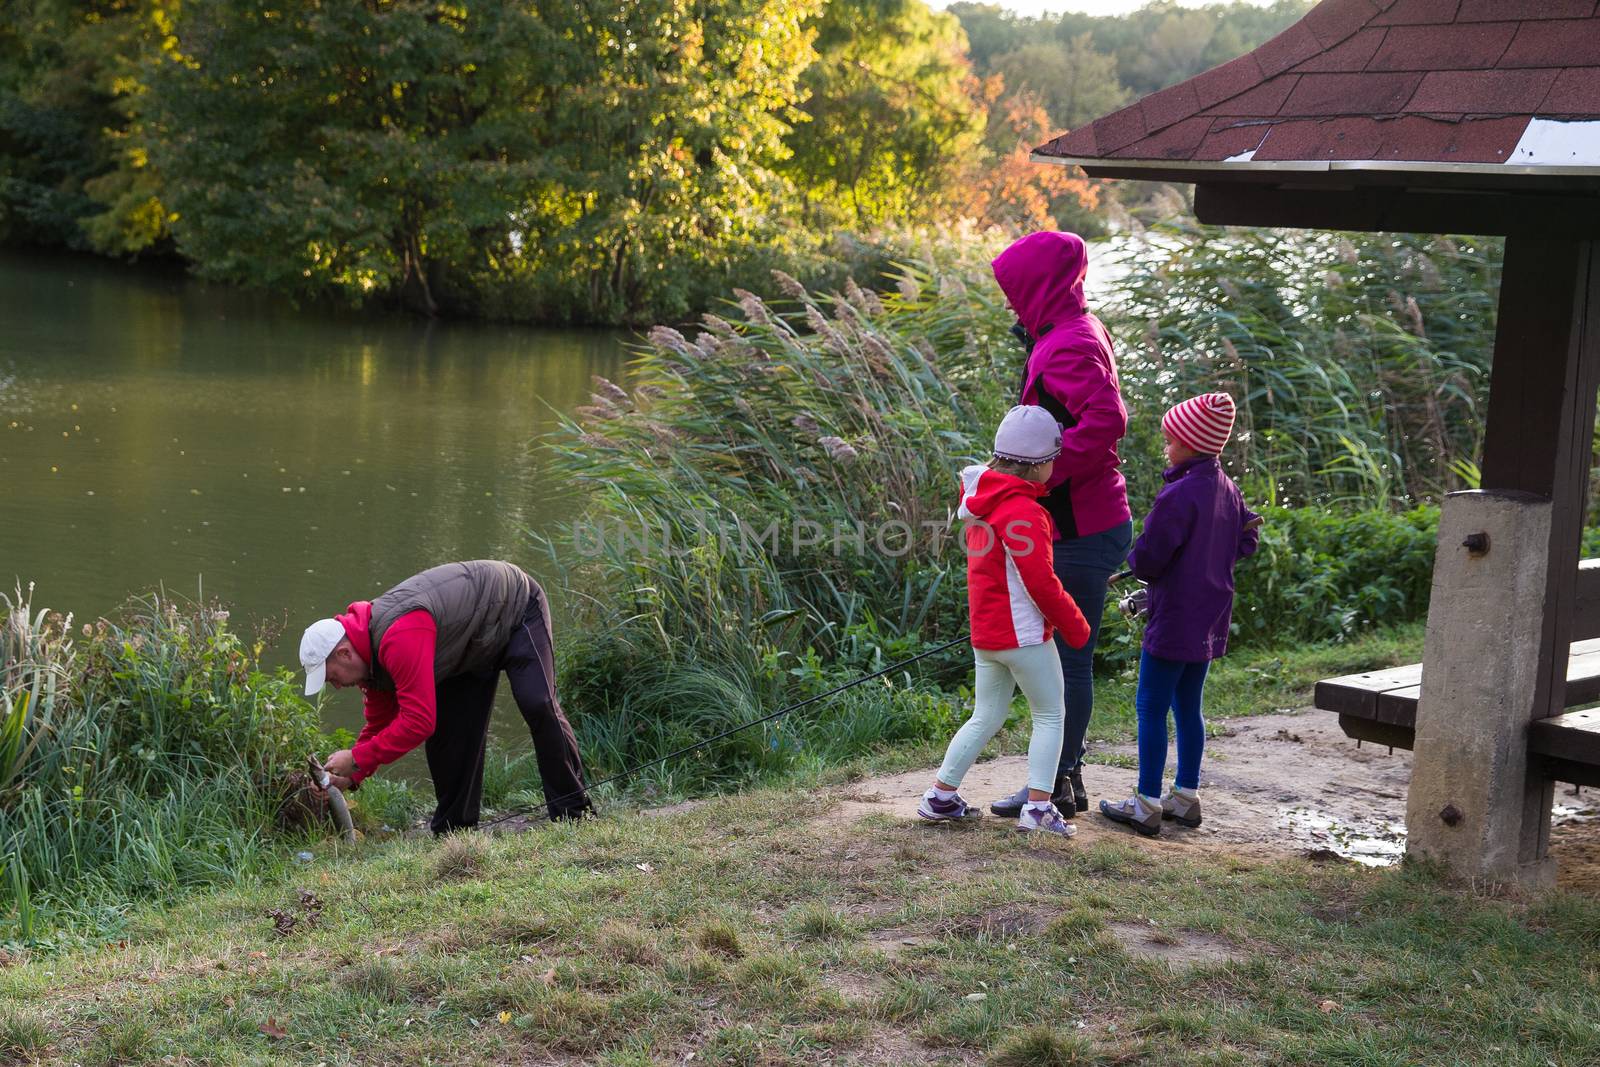 A family of four people on the lake fishing. Caught pike. Fishing. Dad caught a fish, little girls are happy. Autumn. by AndrewBu